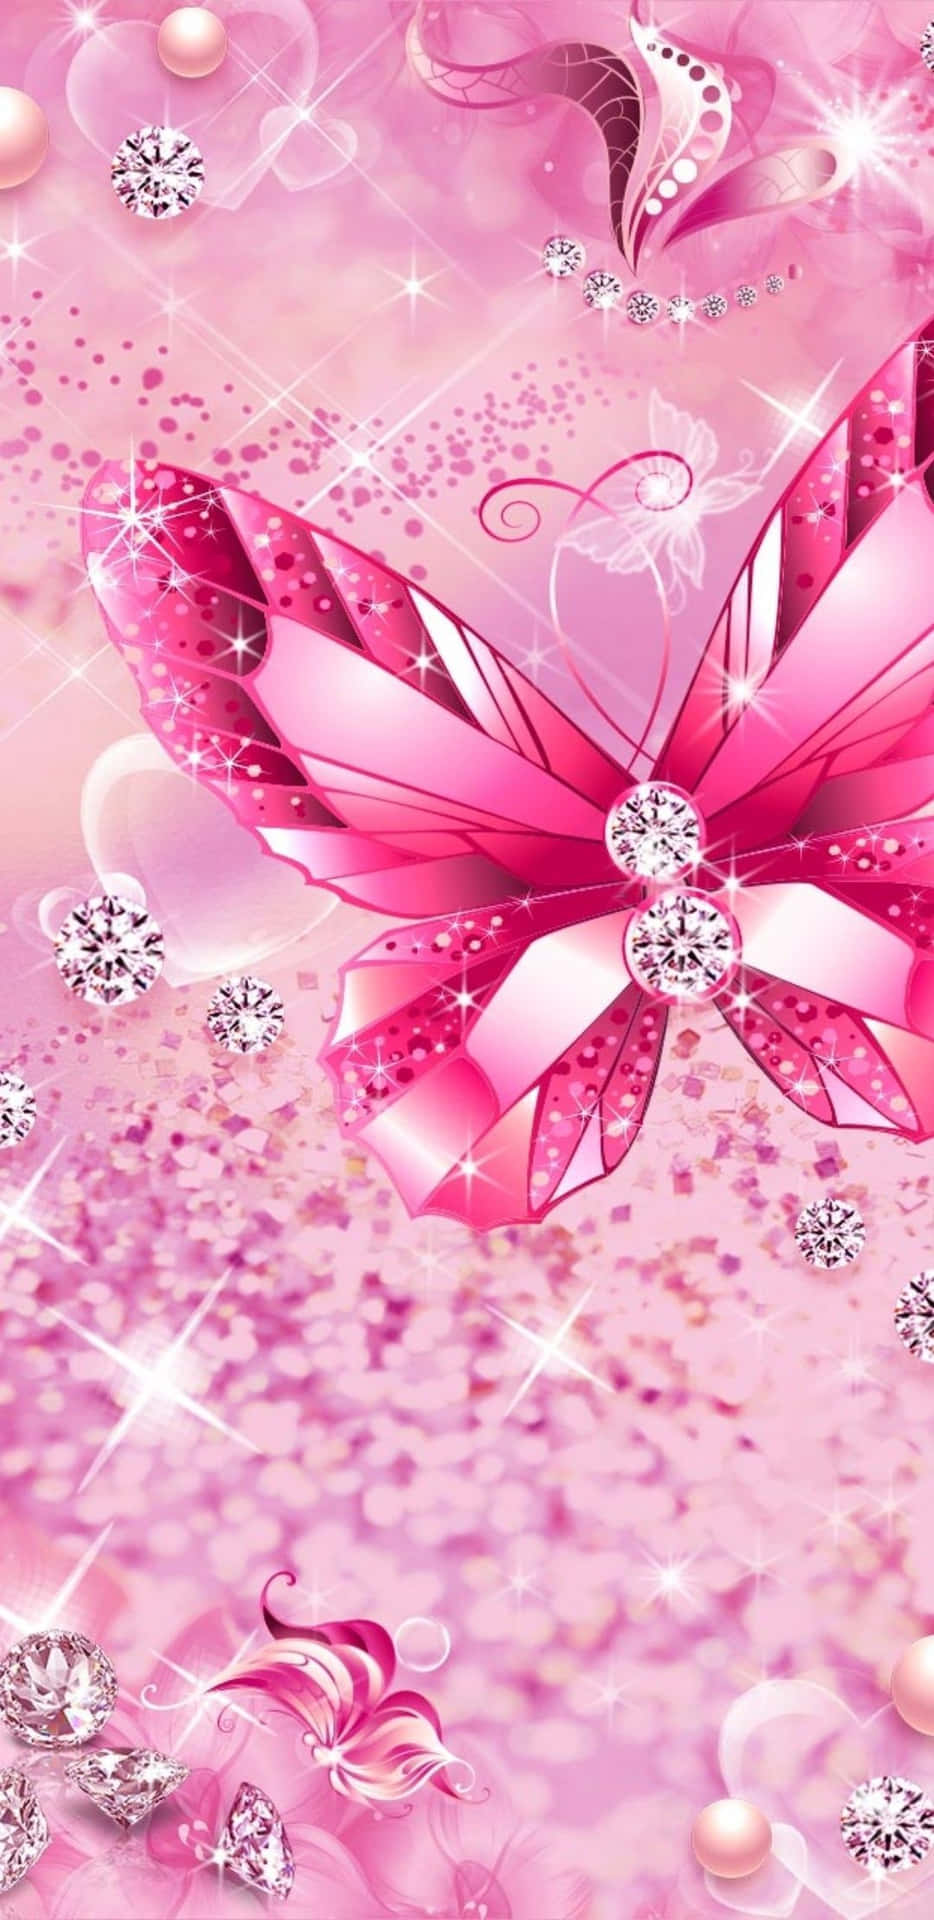 Butterfly aesthetic background pink design with sparkling stars  free  image by ra  Fondos de pantalla de iphone Ideas de fondos de pantalla  Pantalla de iphone